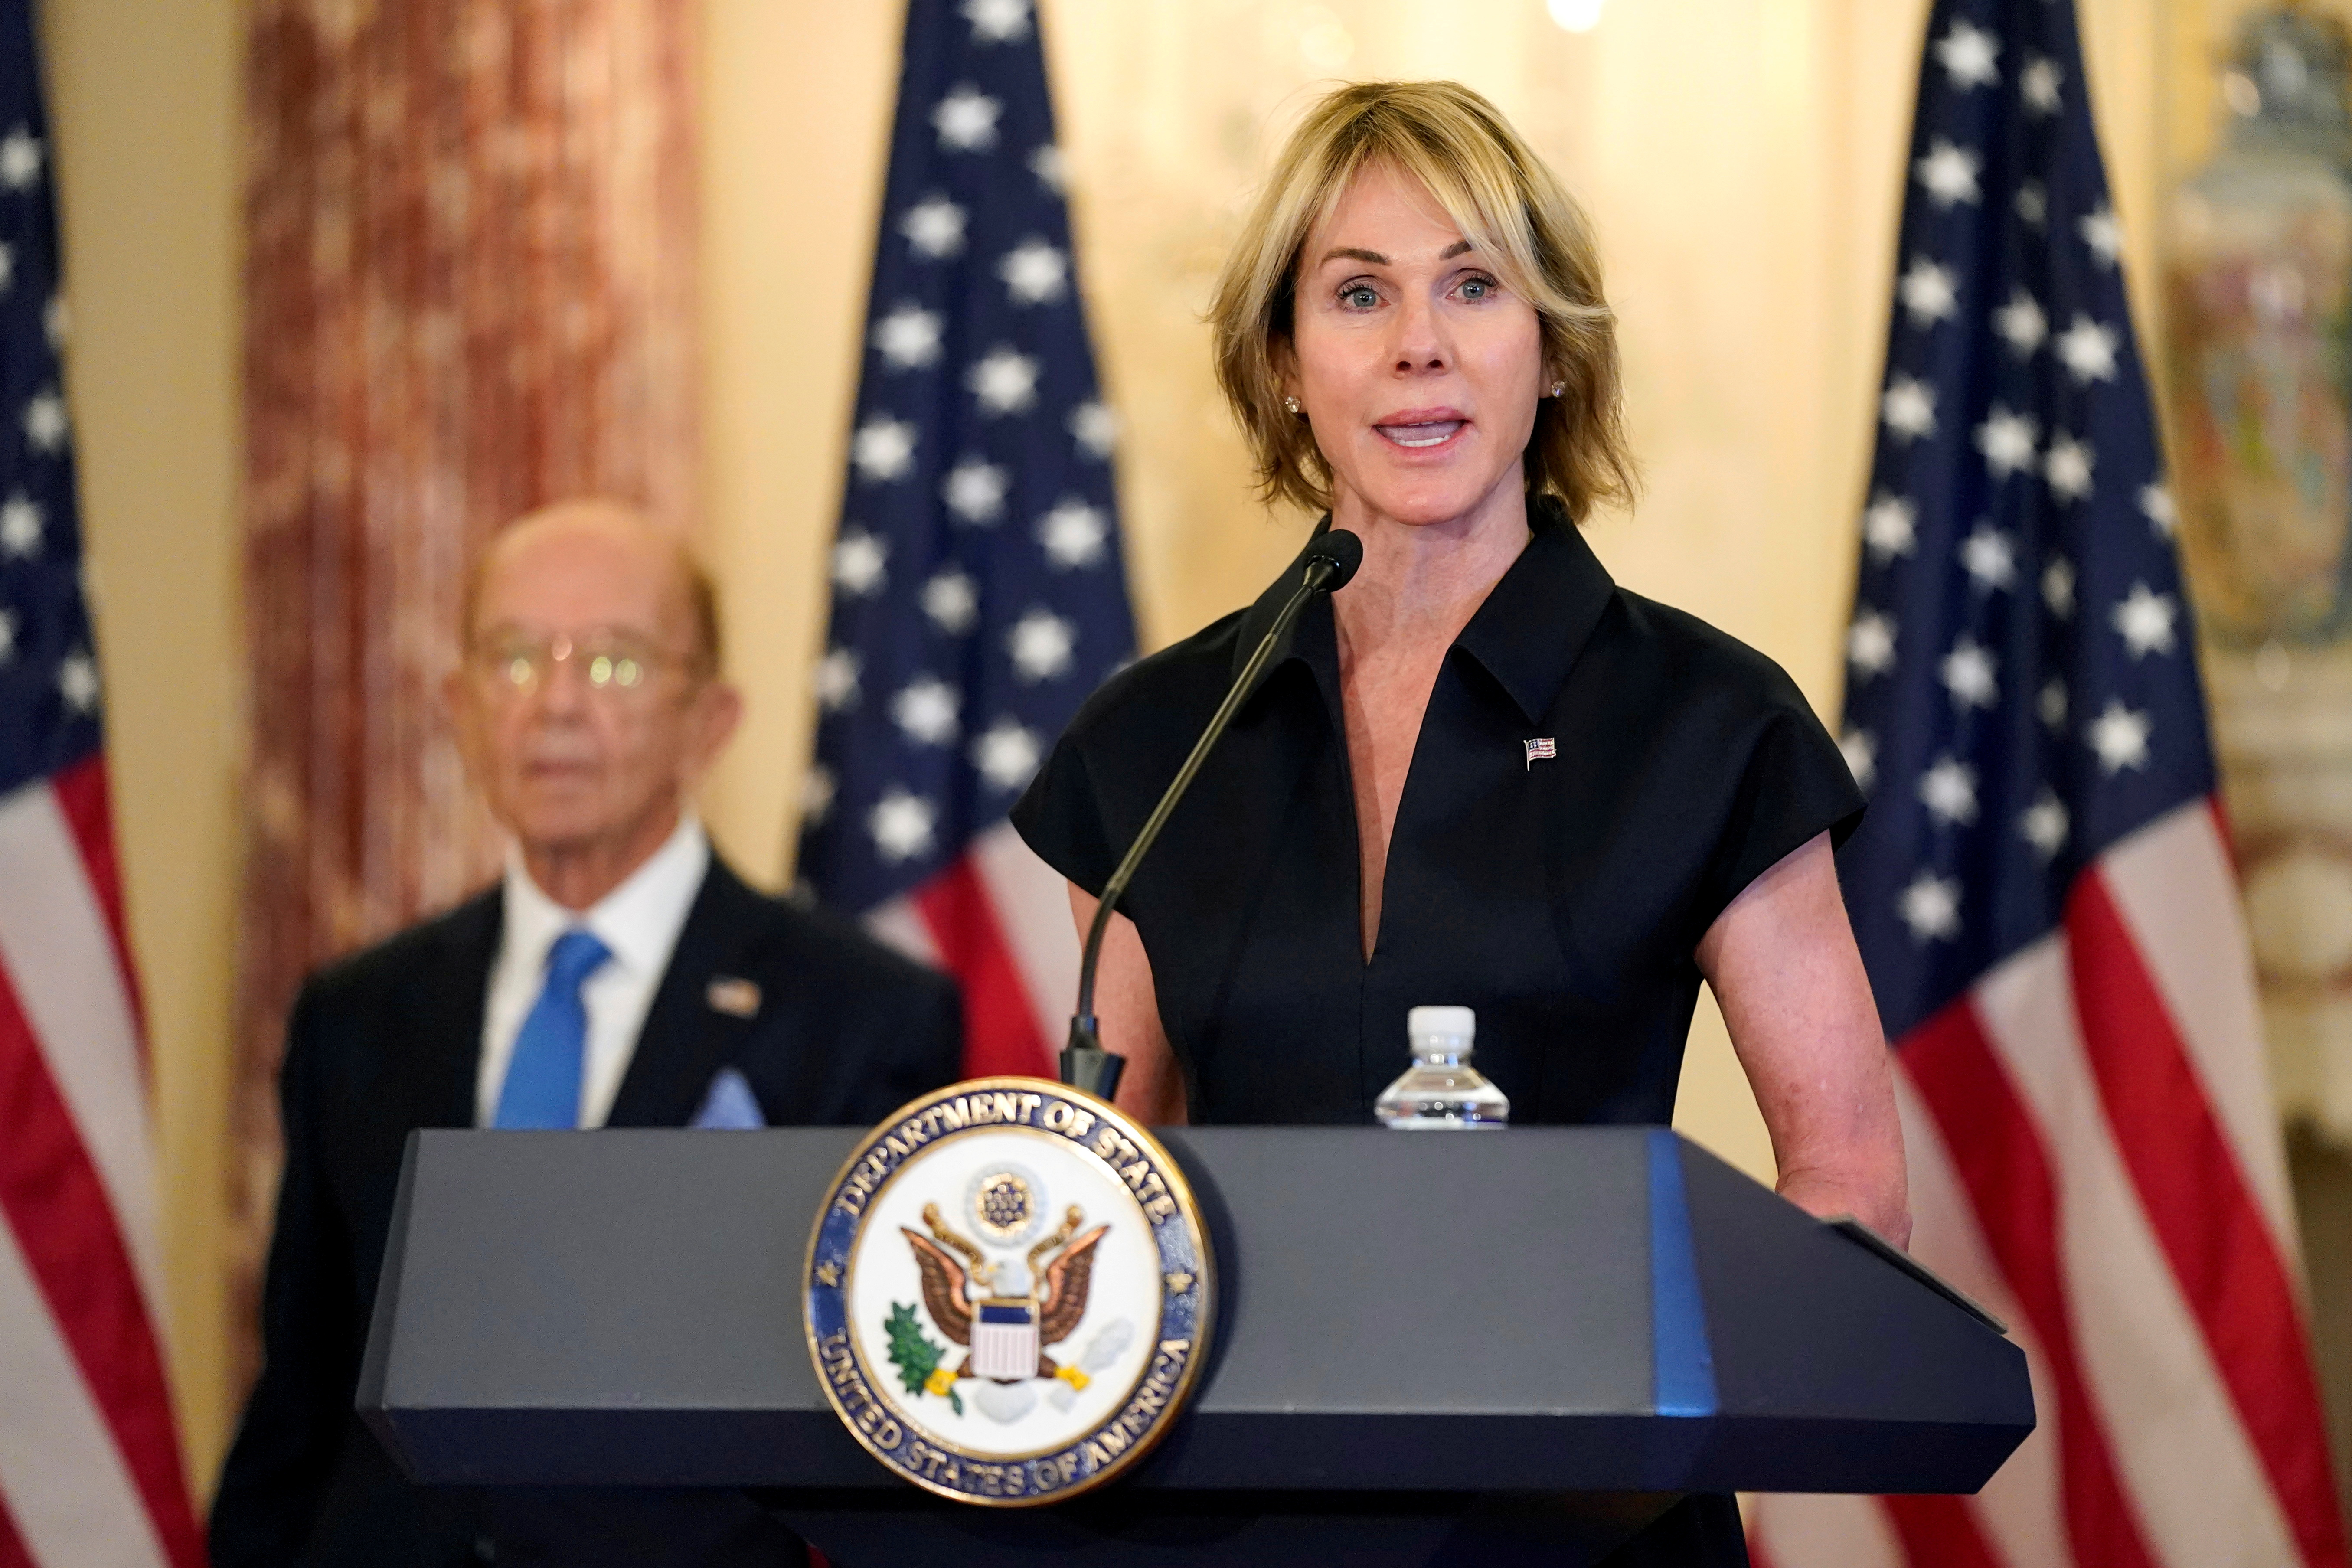 U.S. Ambassador to the United Nations Kelly Craft during a news conference